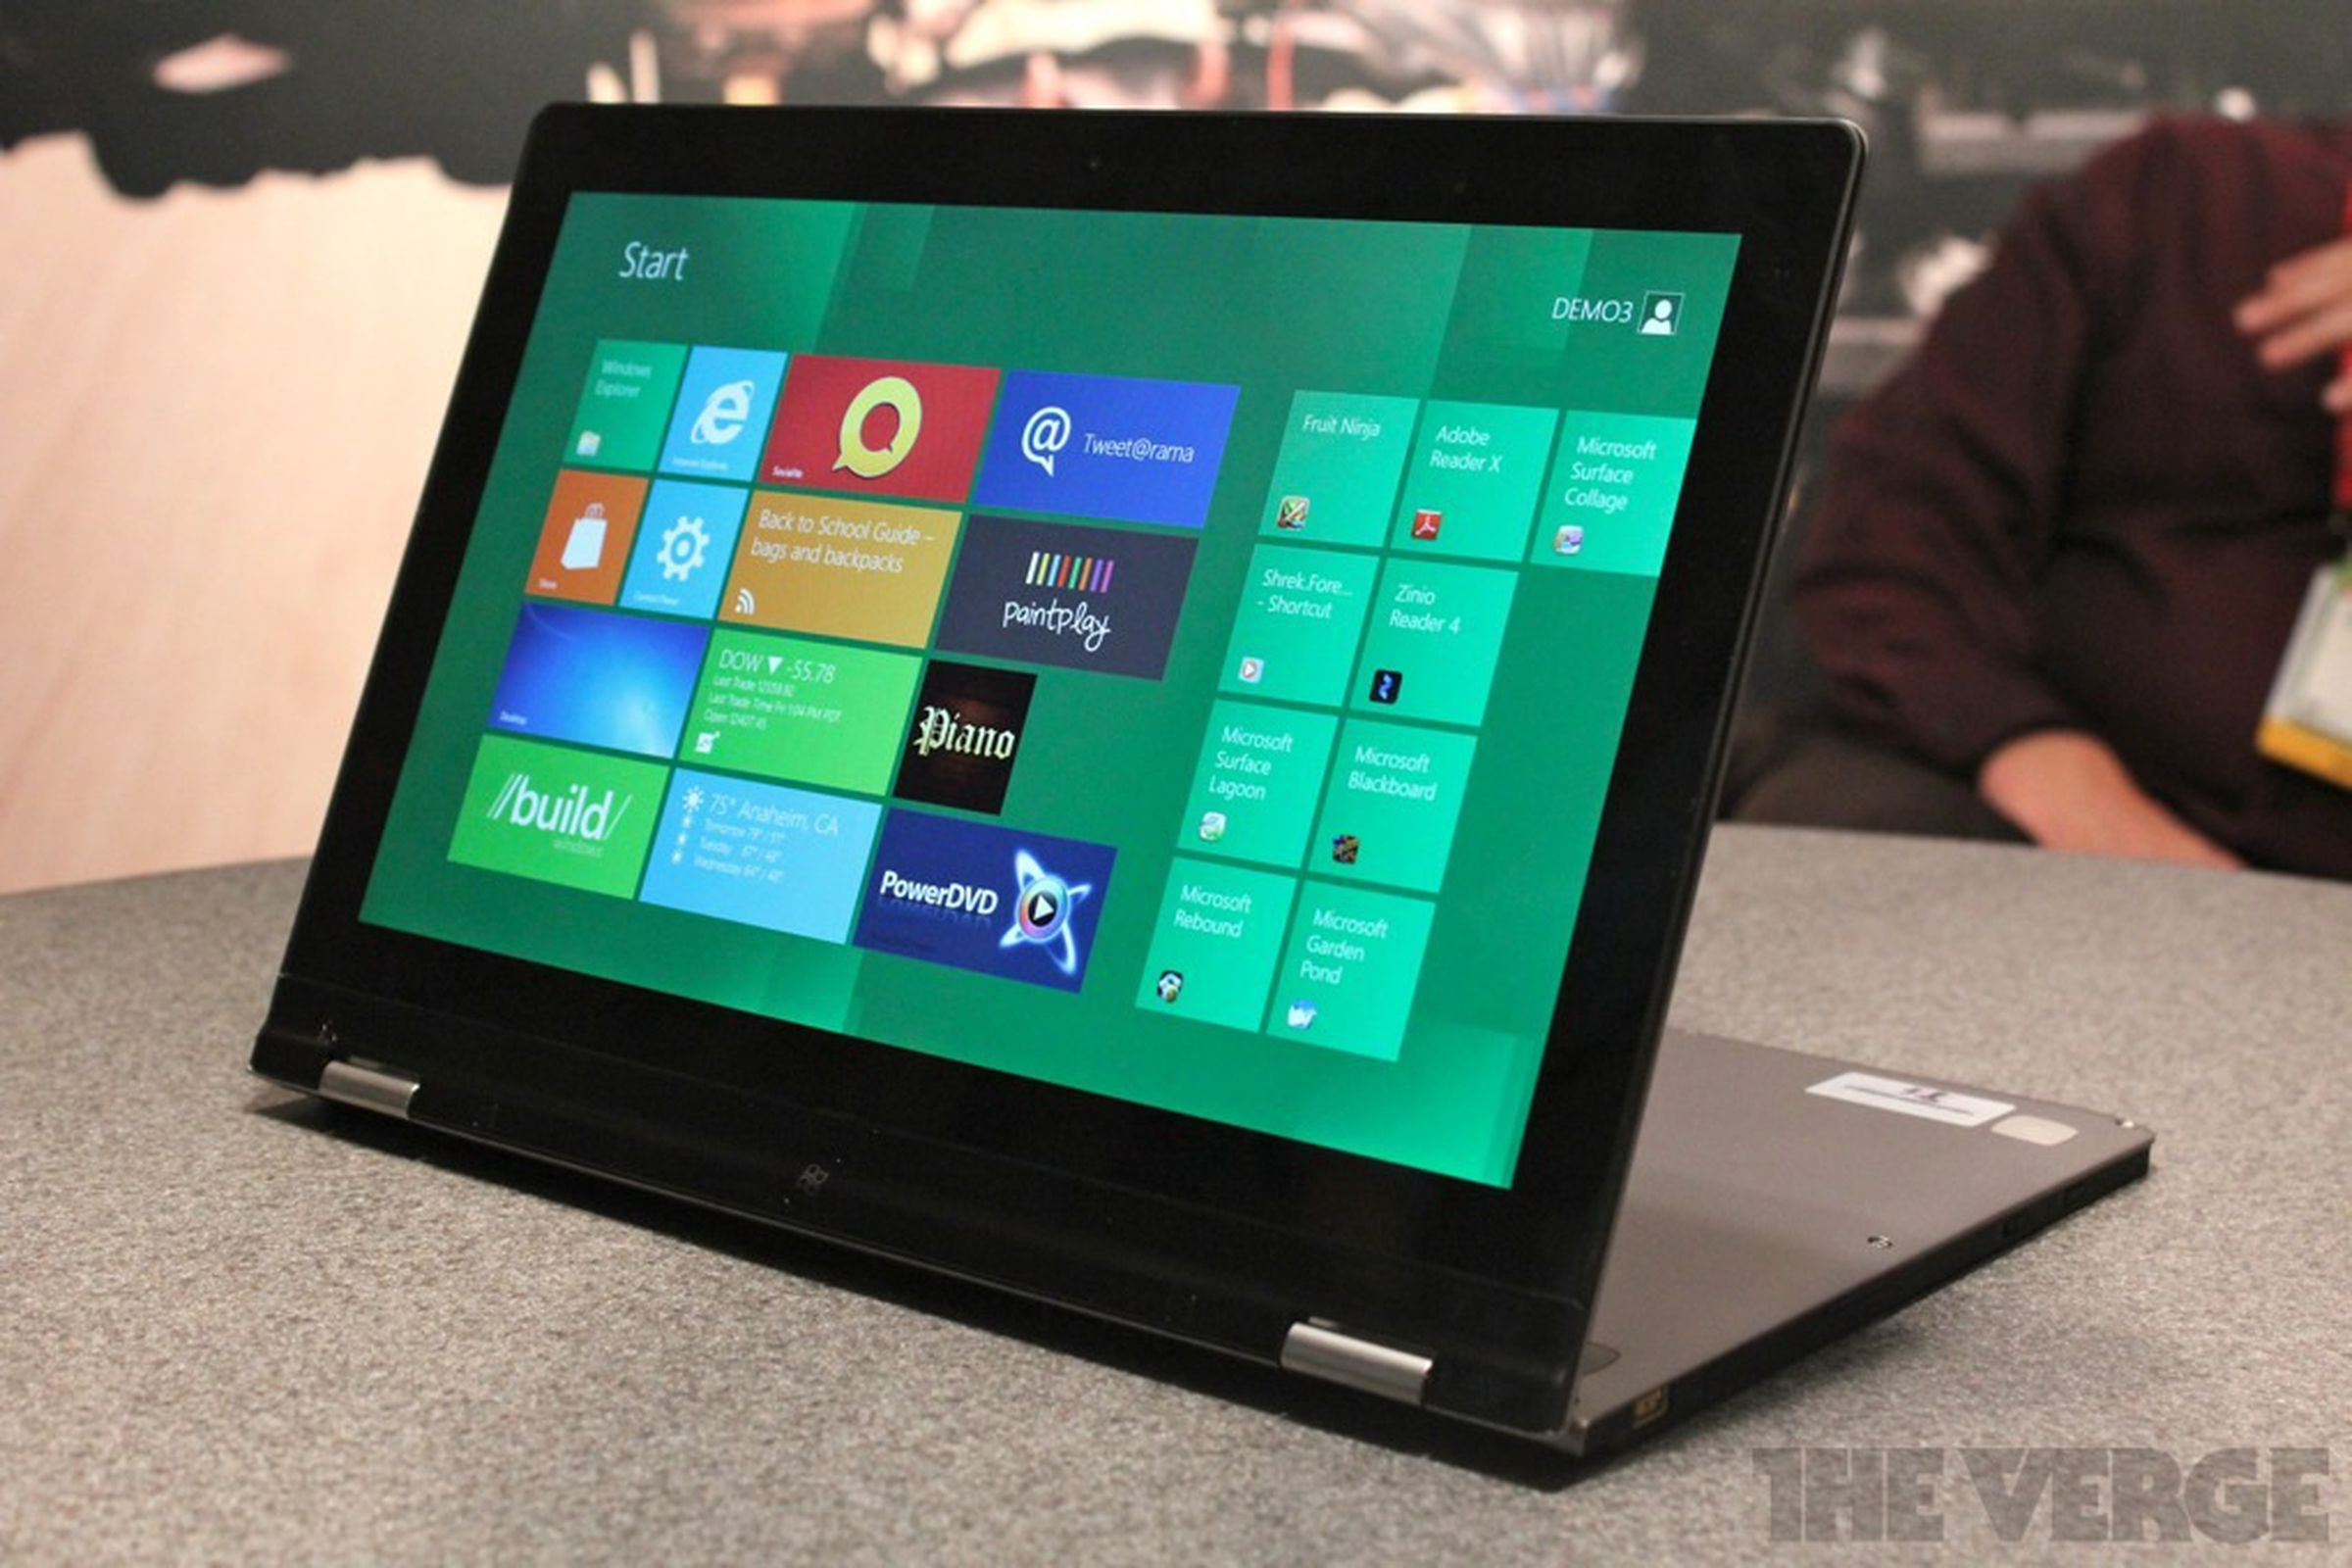 Gallery Photo: Lenovo IdeaPad Yoga hands-on pictures